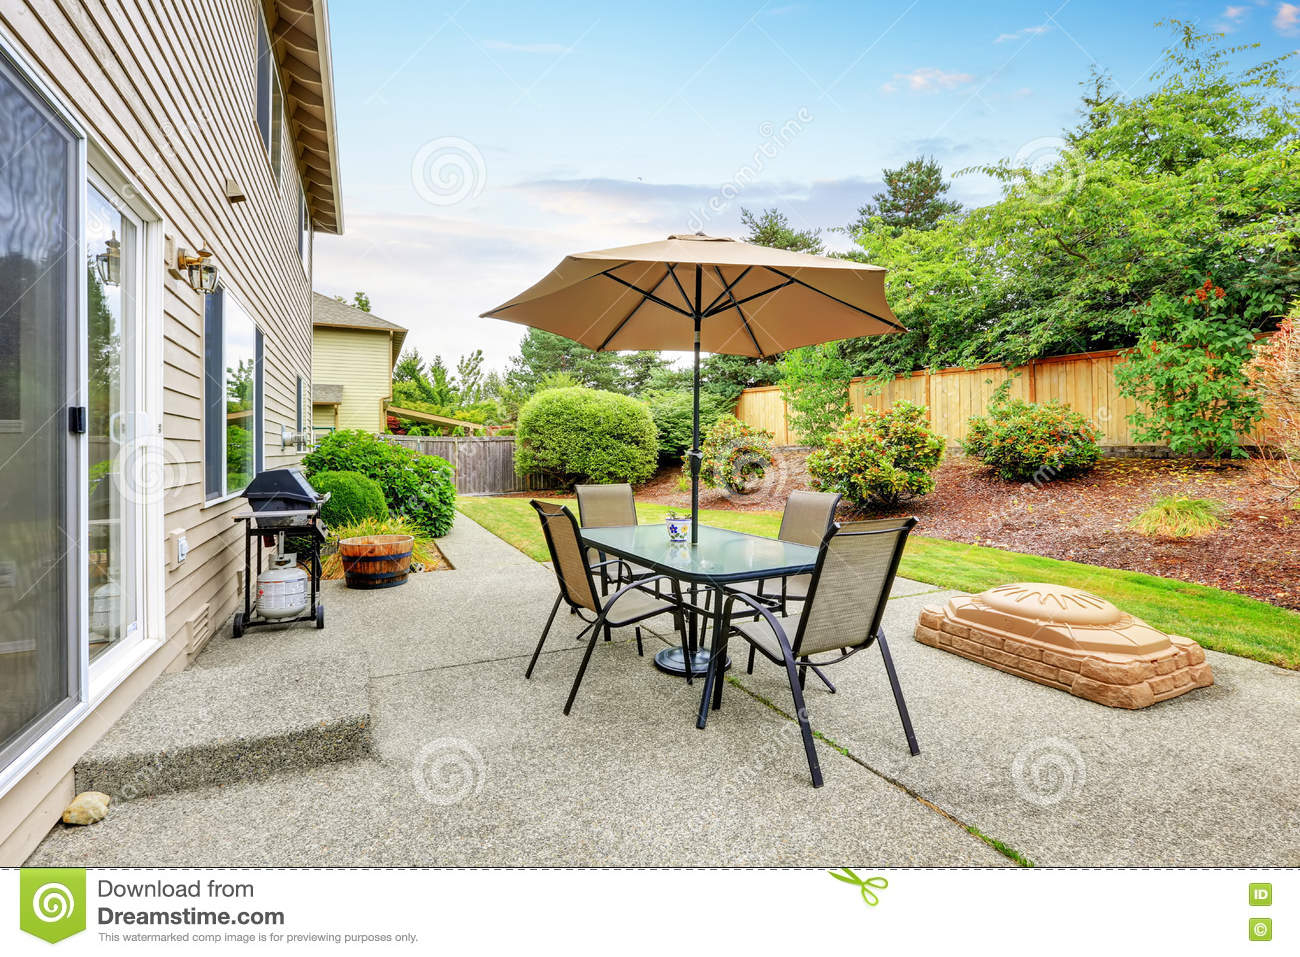 Patio Table Set With Umbrella In The Back Yard Stock Image intended for sizing 1300 X 957